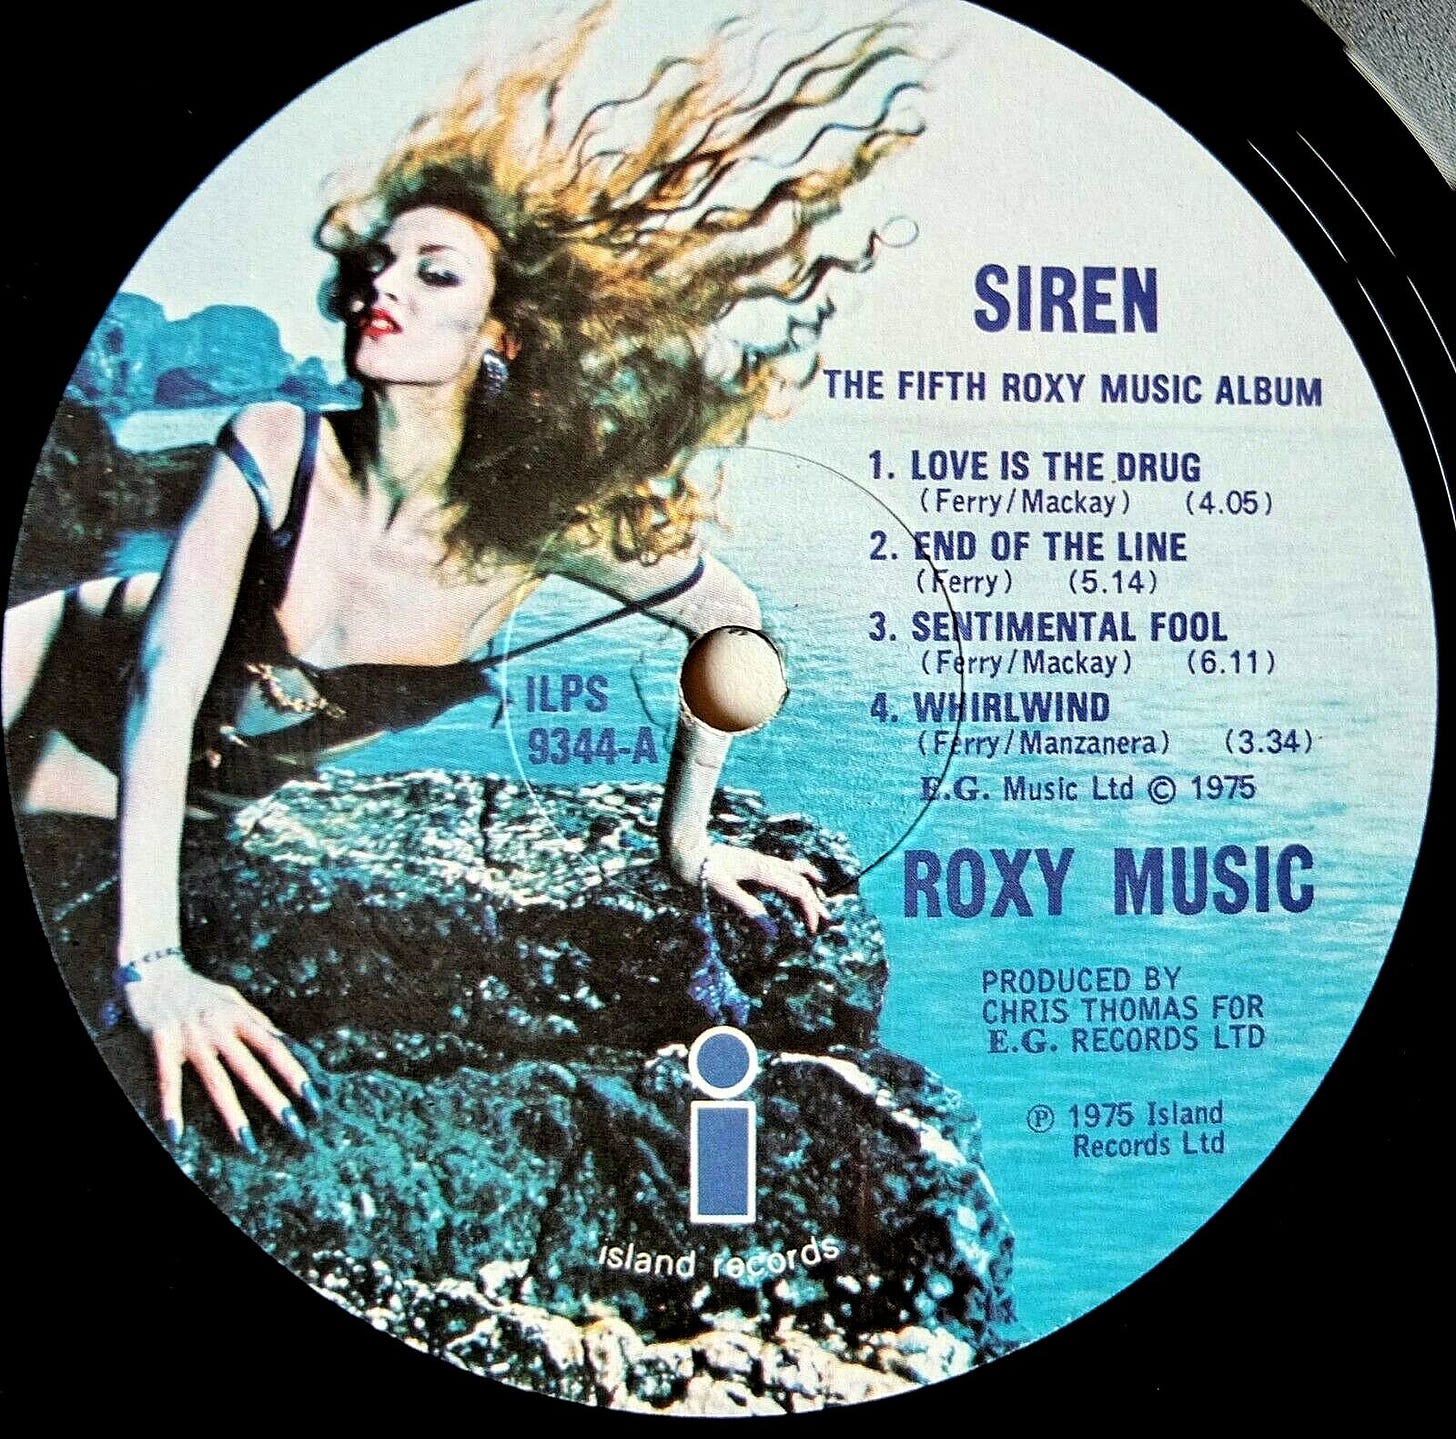 The center label of an LP of Roxy Music's album "Siren." A beautiful woman, her hair flying, is poised on a rock. Text on the label says, "The Fifth Roxy Music Album," followed by a list of songs: "Love Is the Drug," "End of the Line," "Sentimental Fool," and "Whirlwind." The record is copyrighted in 1975. 